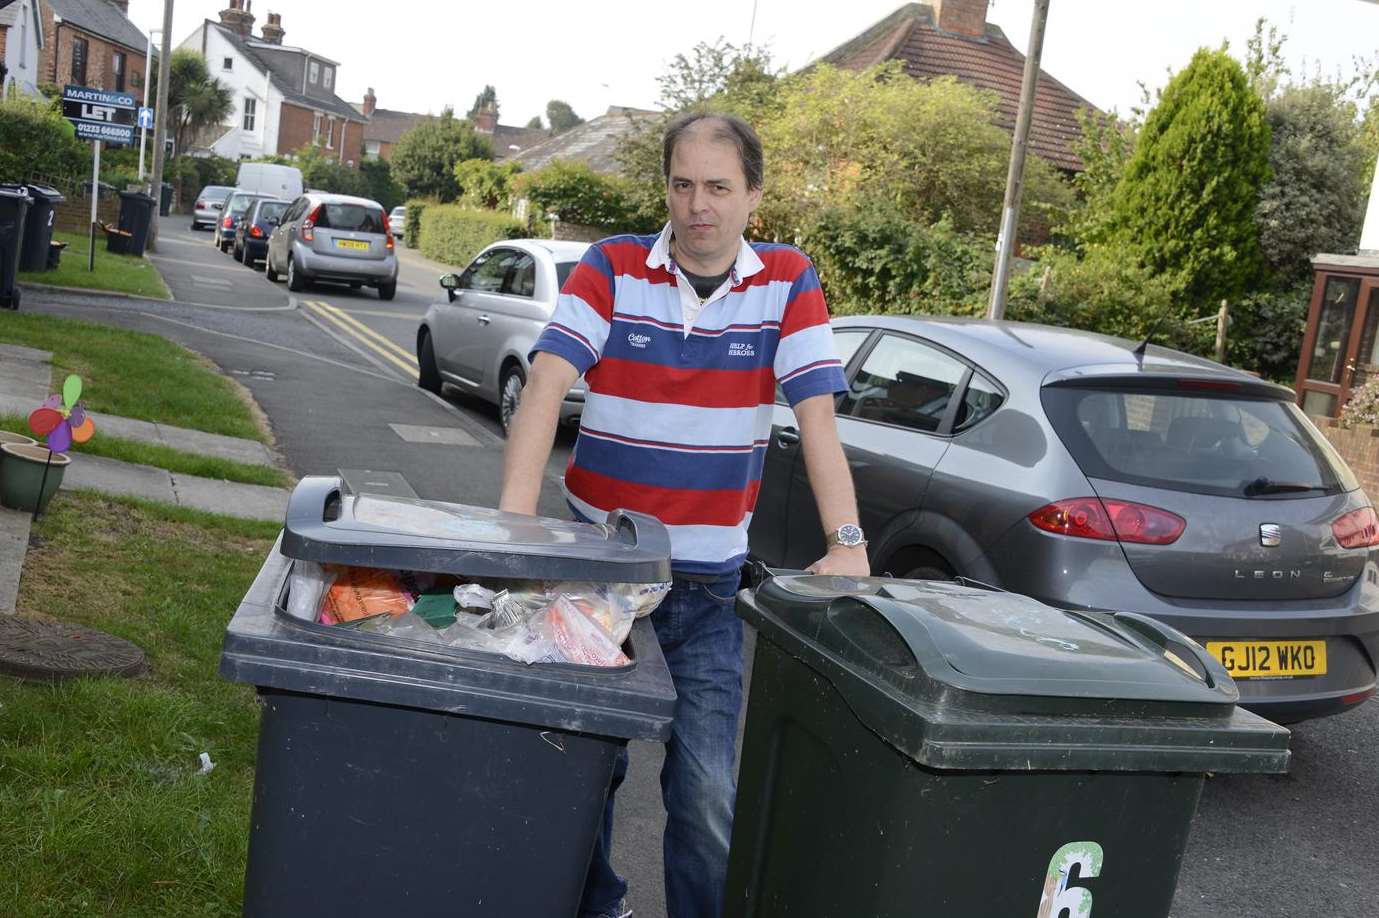 The refuse bins in the close are already full